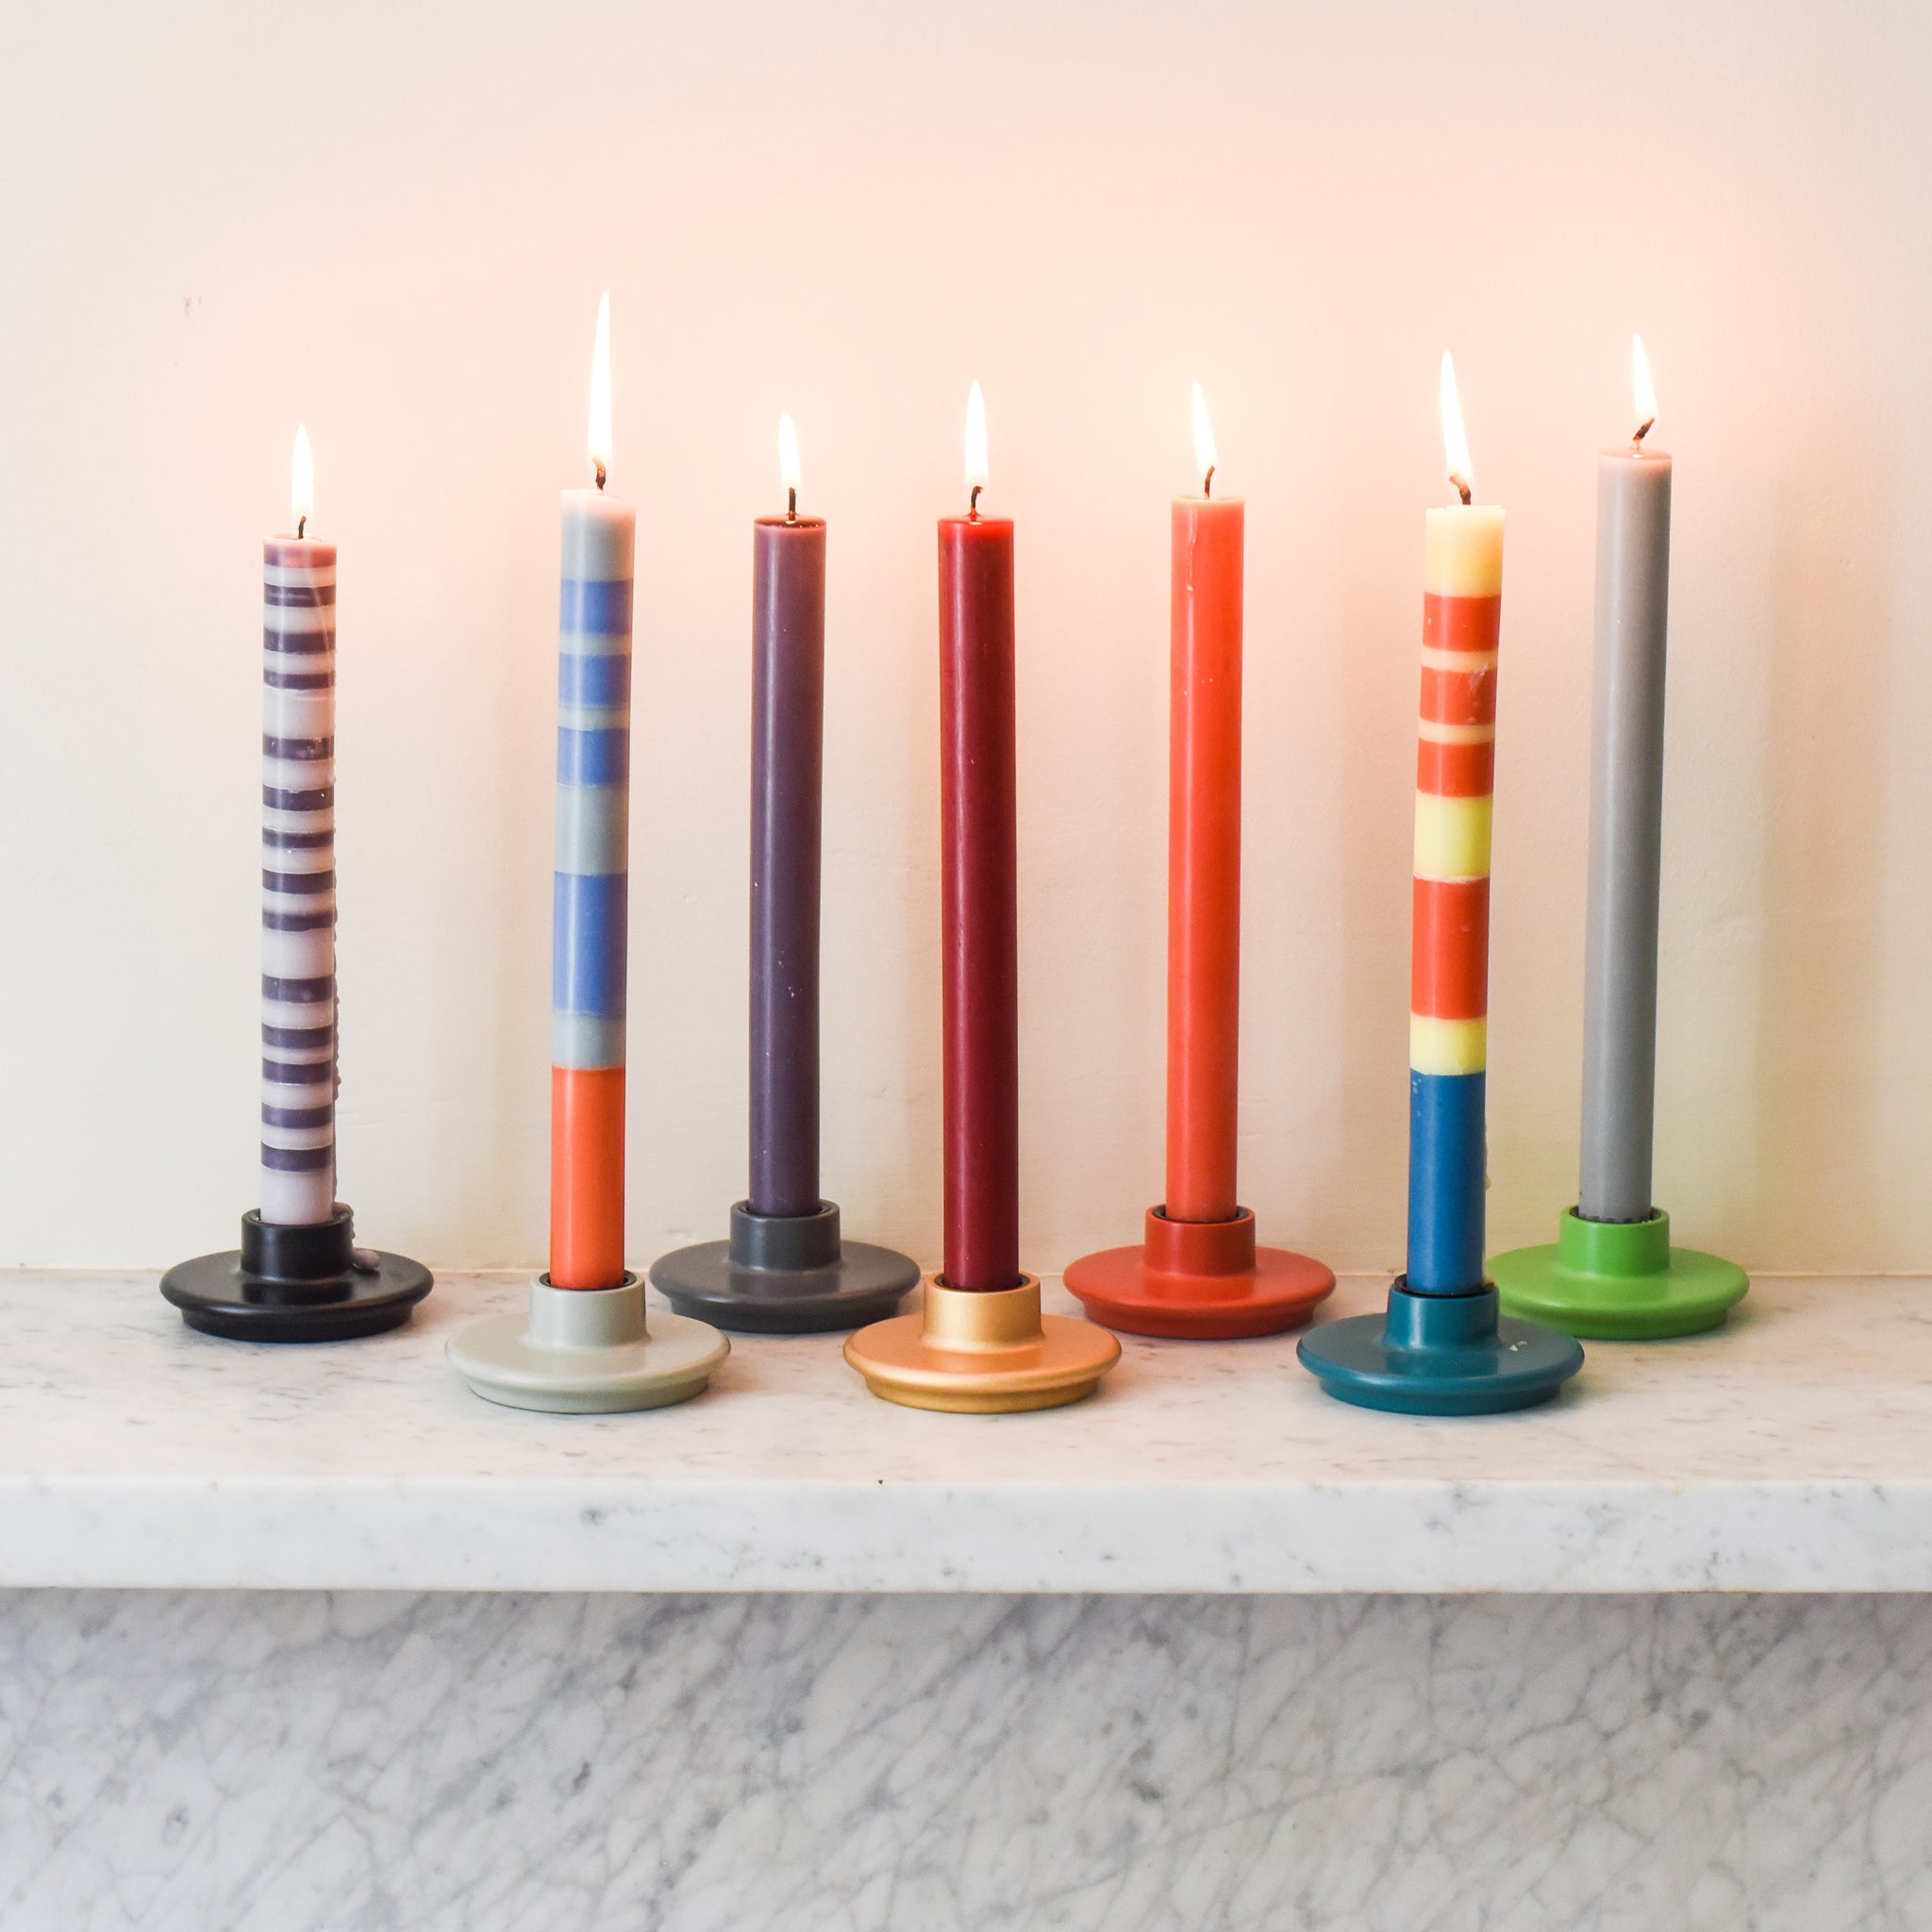 Striped Dinner Candles - Multicolour set of 6